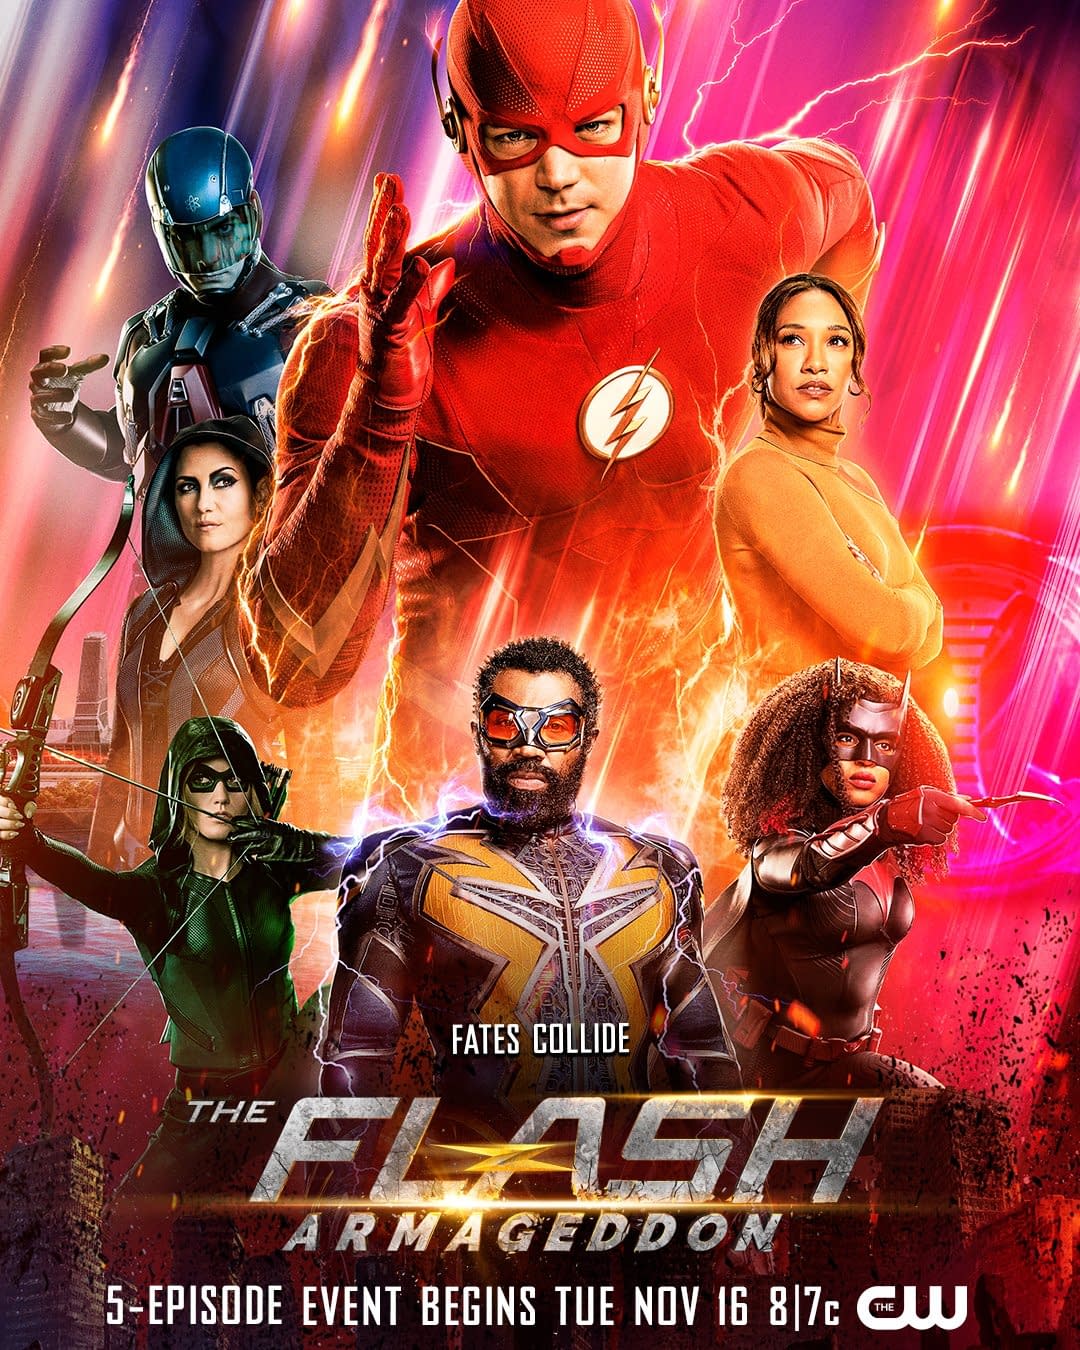 The Flash Season 8 Armageddon Poster Finds Our Heroes' Fates Colliding